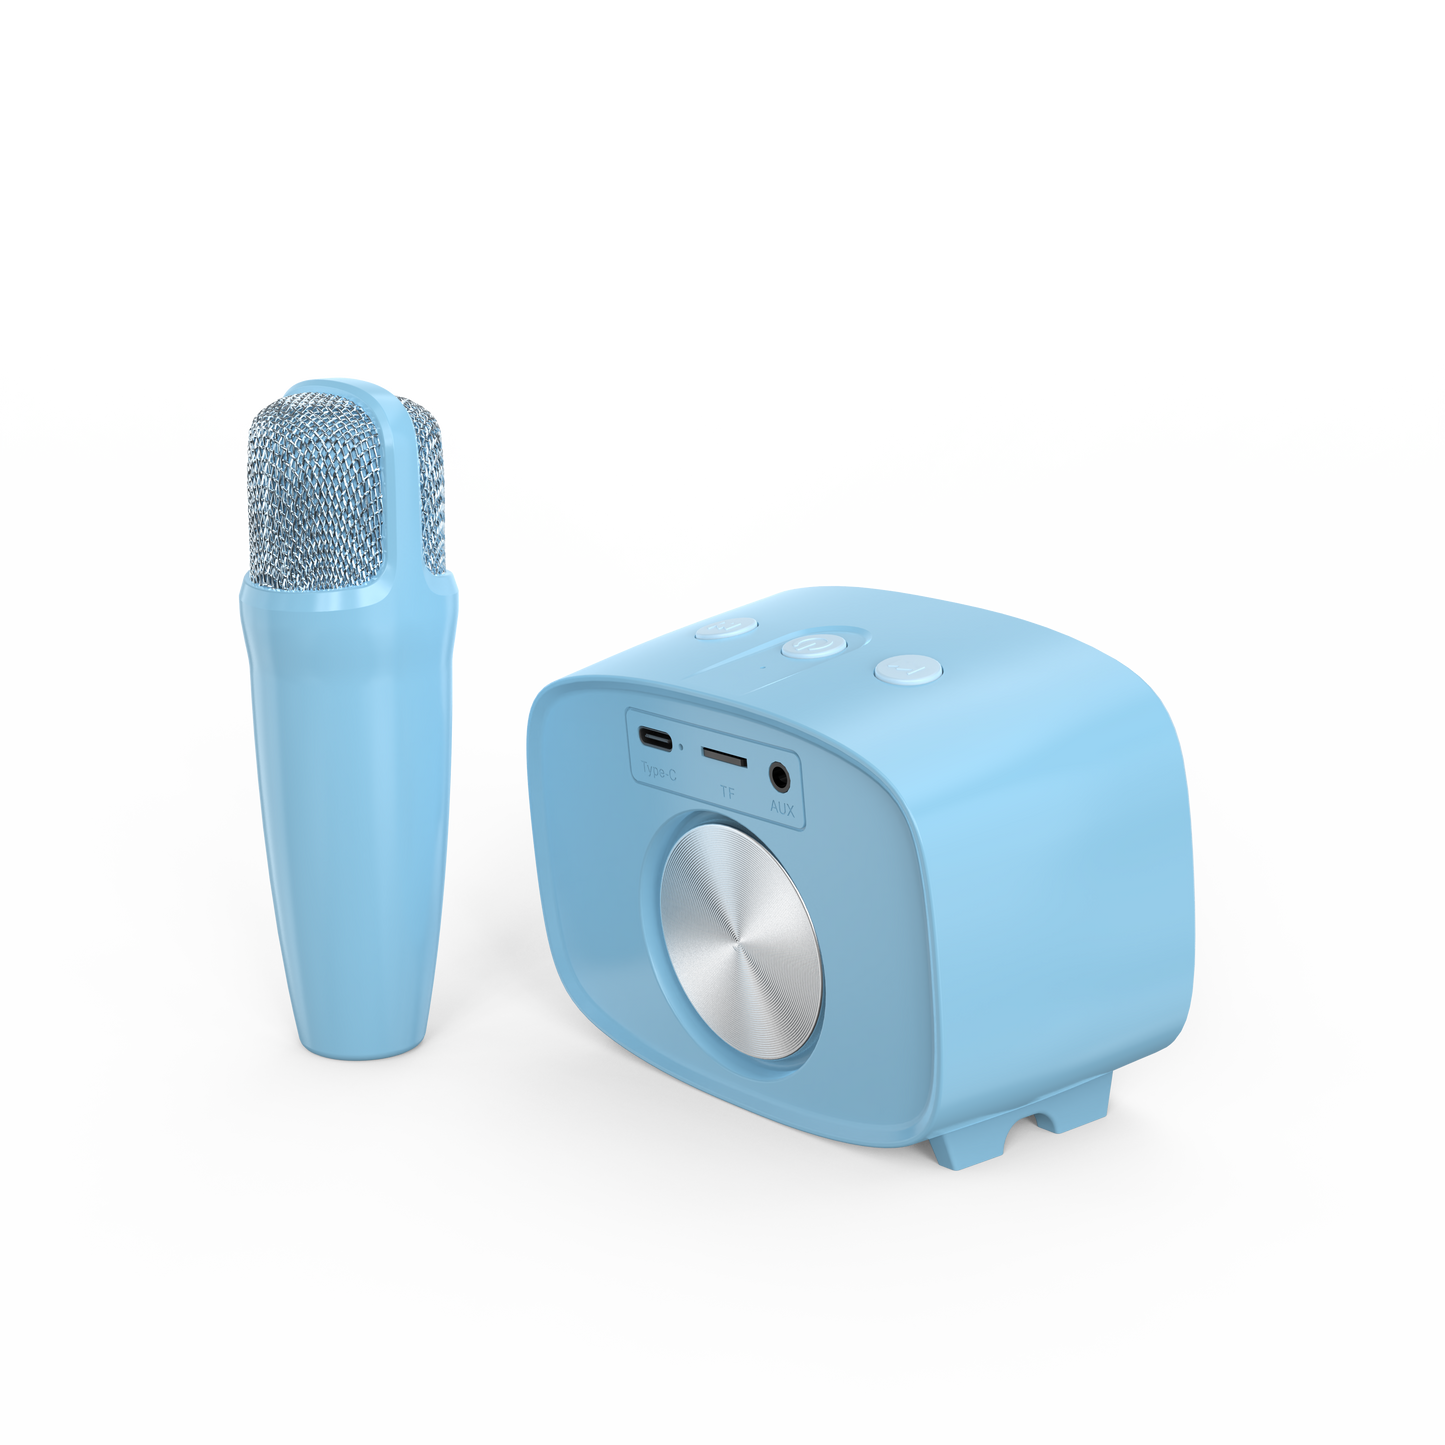 Portable Wireless Speaker for Kids with Voice Change Feature - myFirst Voice 2